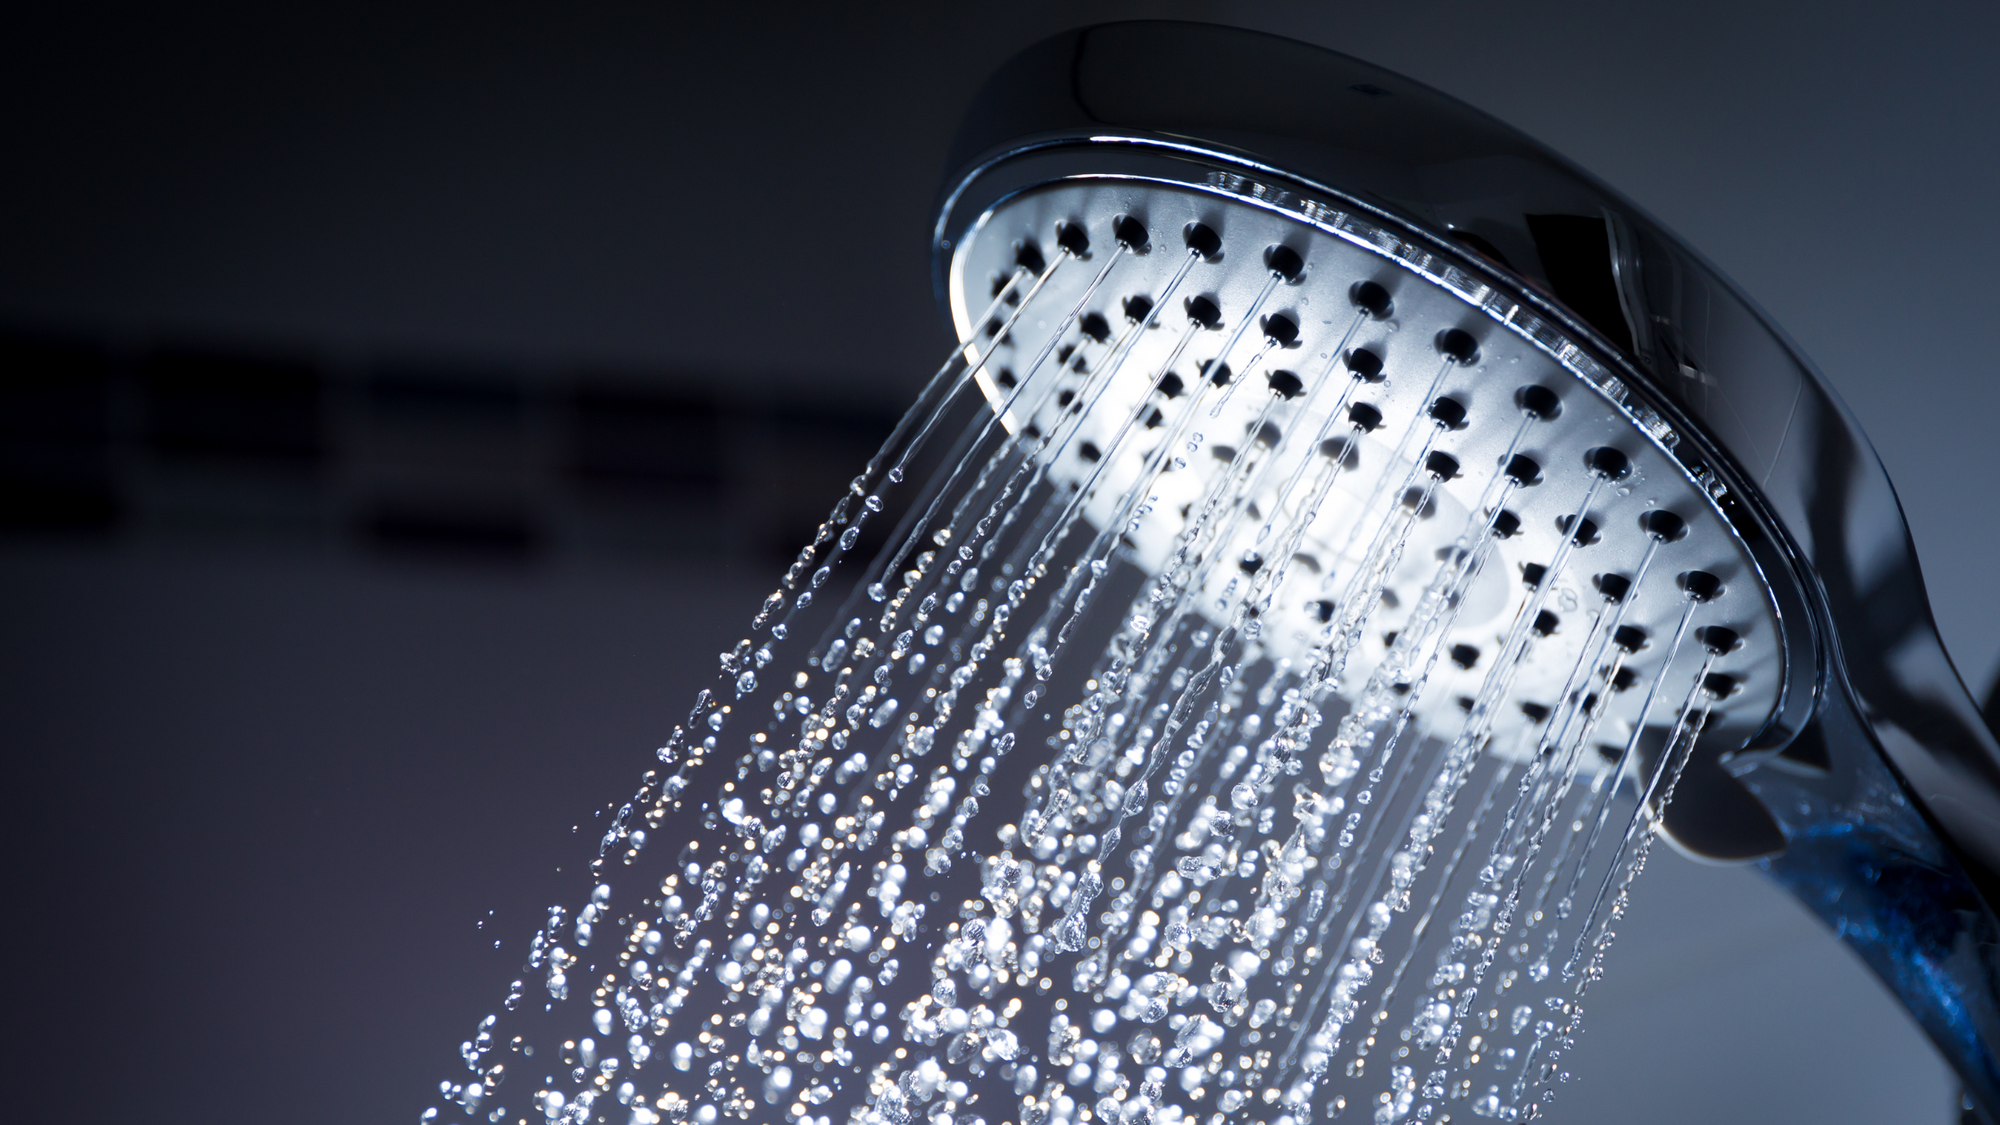 Banish the Bathroom Blues with Smarter Shower Cleaning